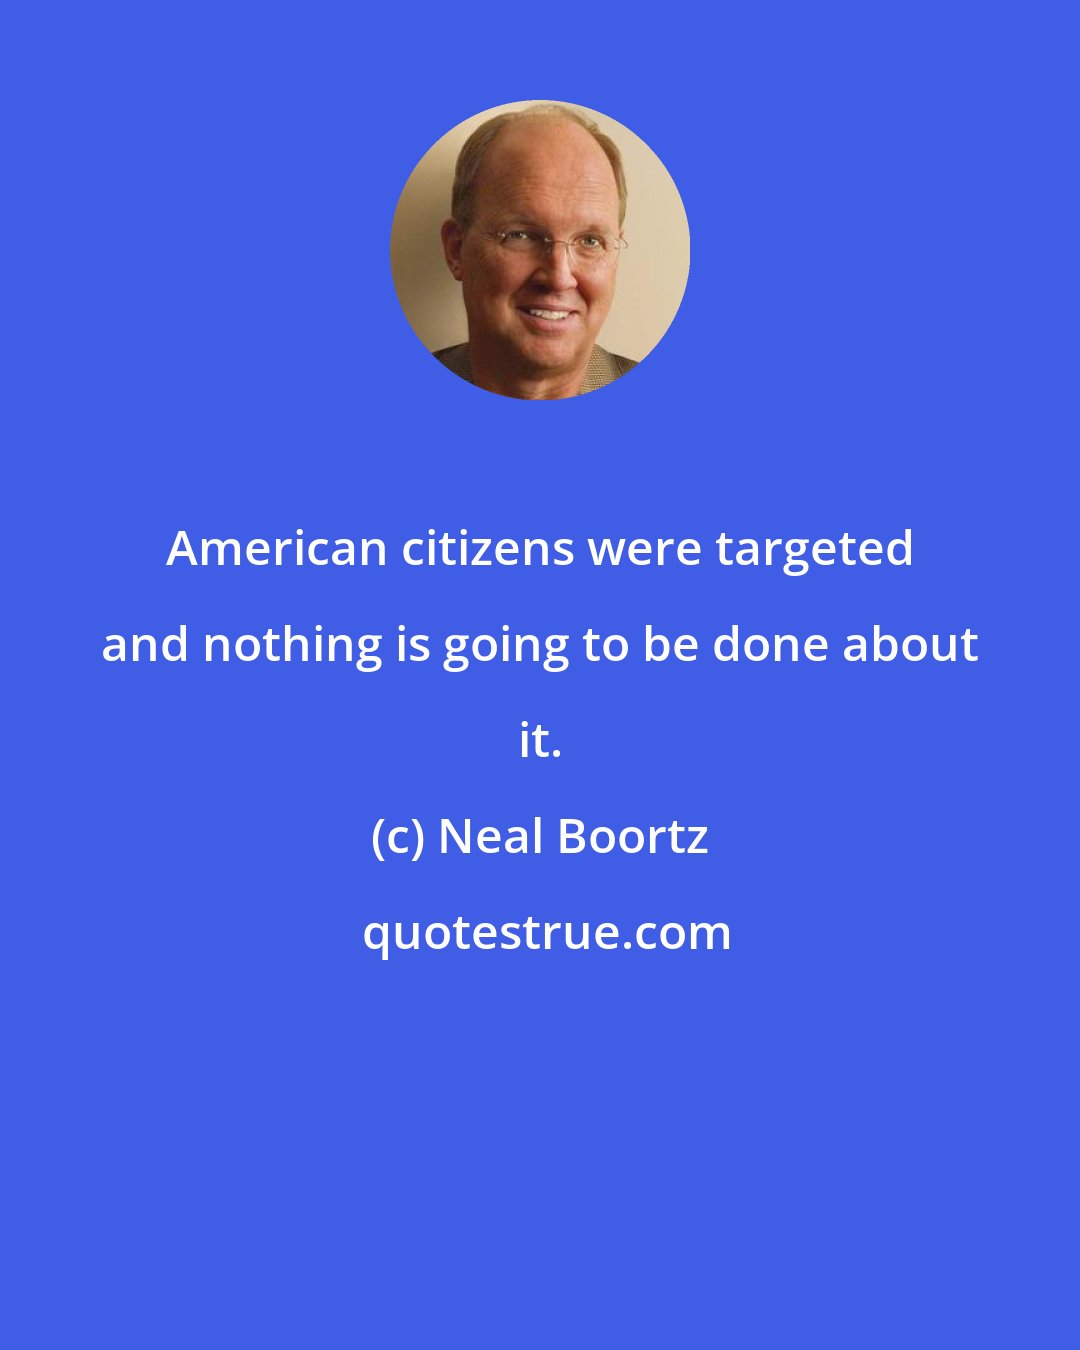 Neal Boortz: American citizens were targeted and nothing is going to be done about it.